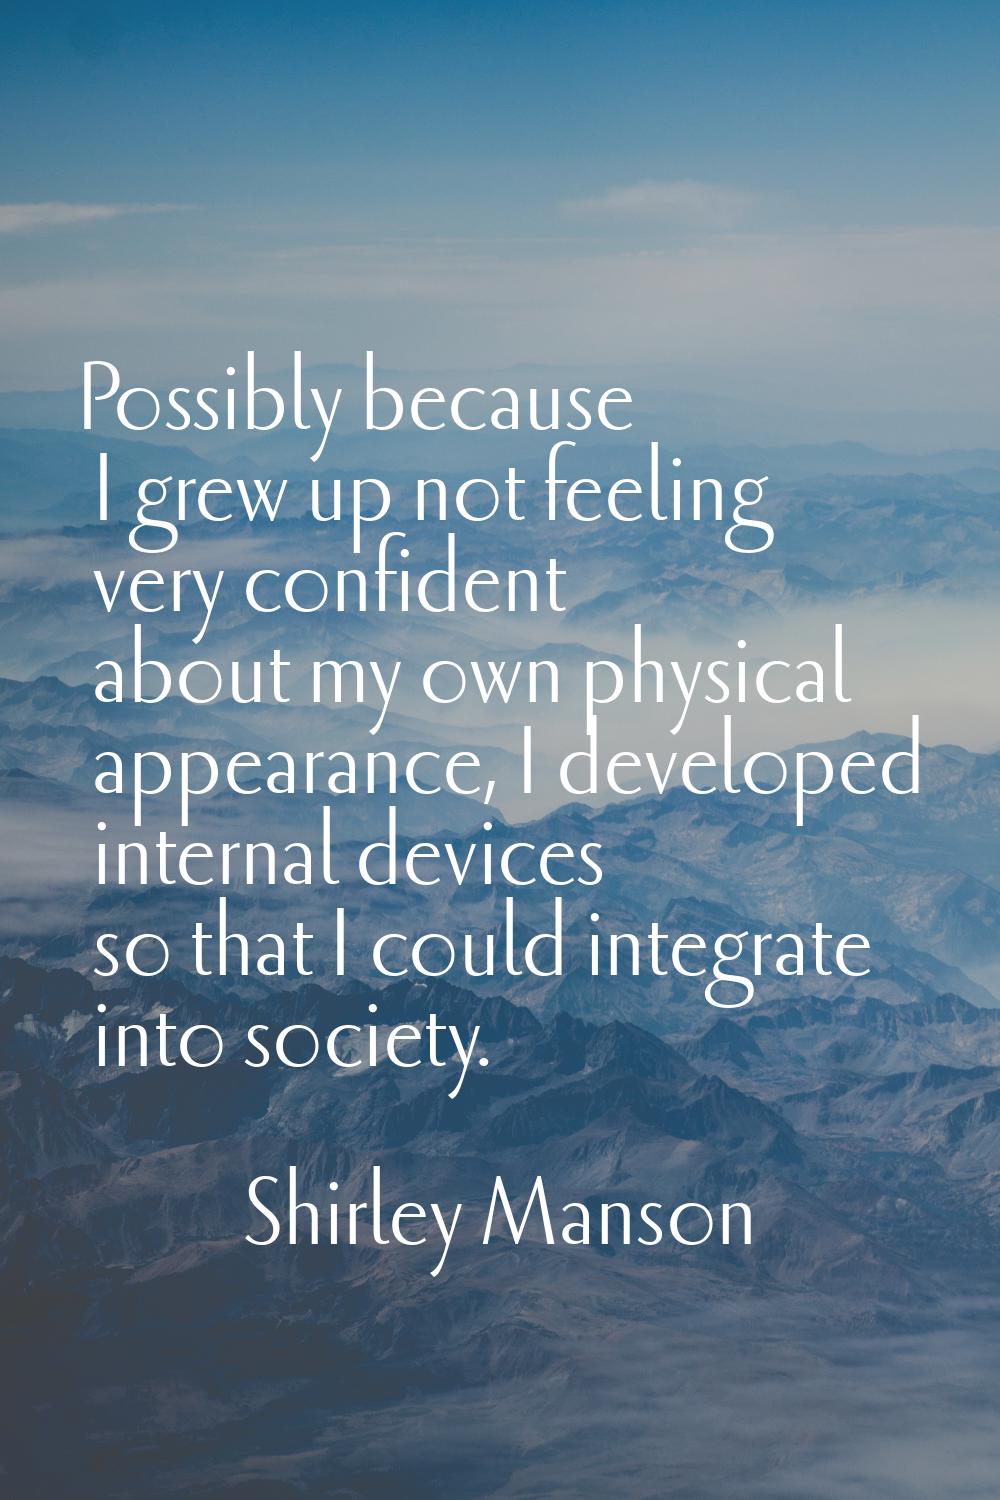 Possibly because I grew up not feeling very confident about my own physical appearance, I developed